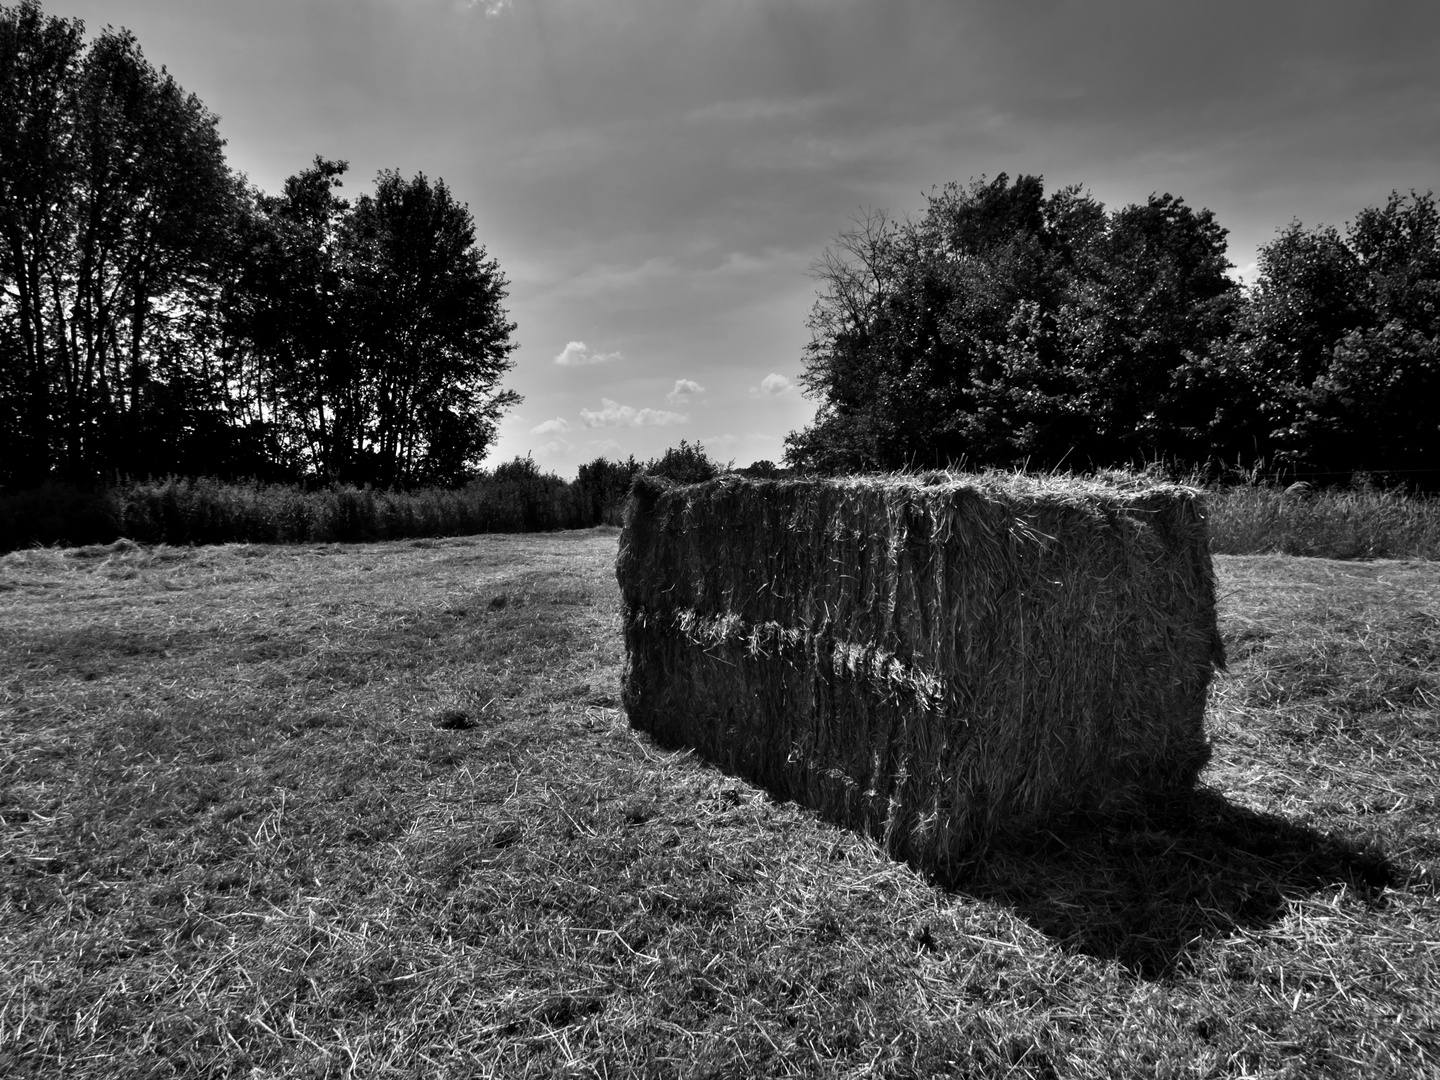 The last bale of hay of summer 2.